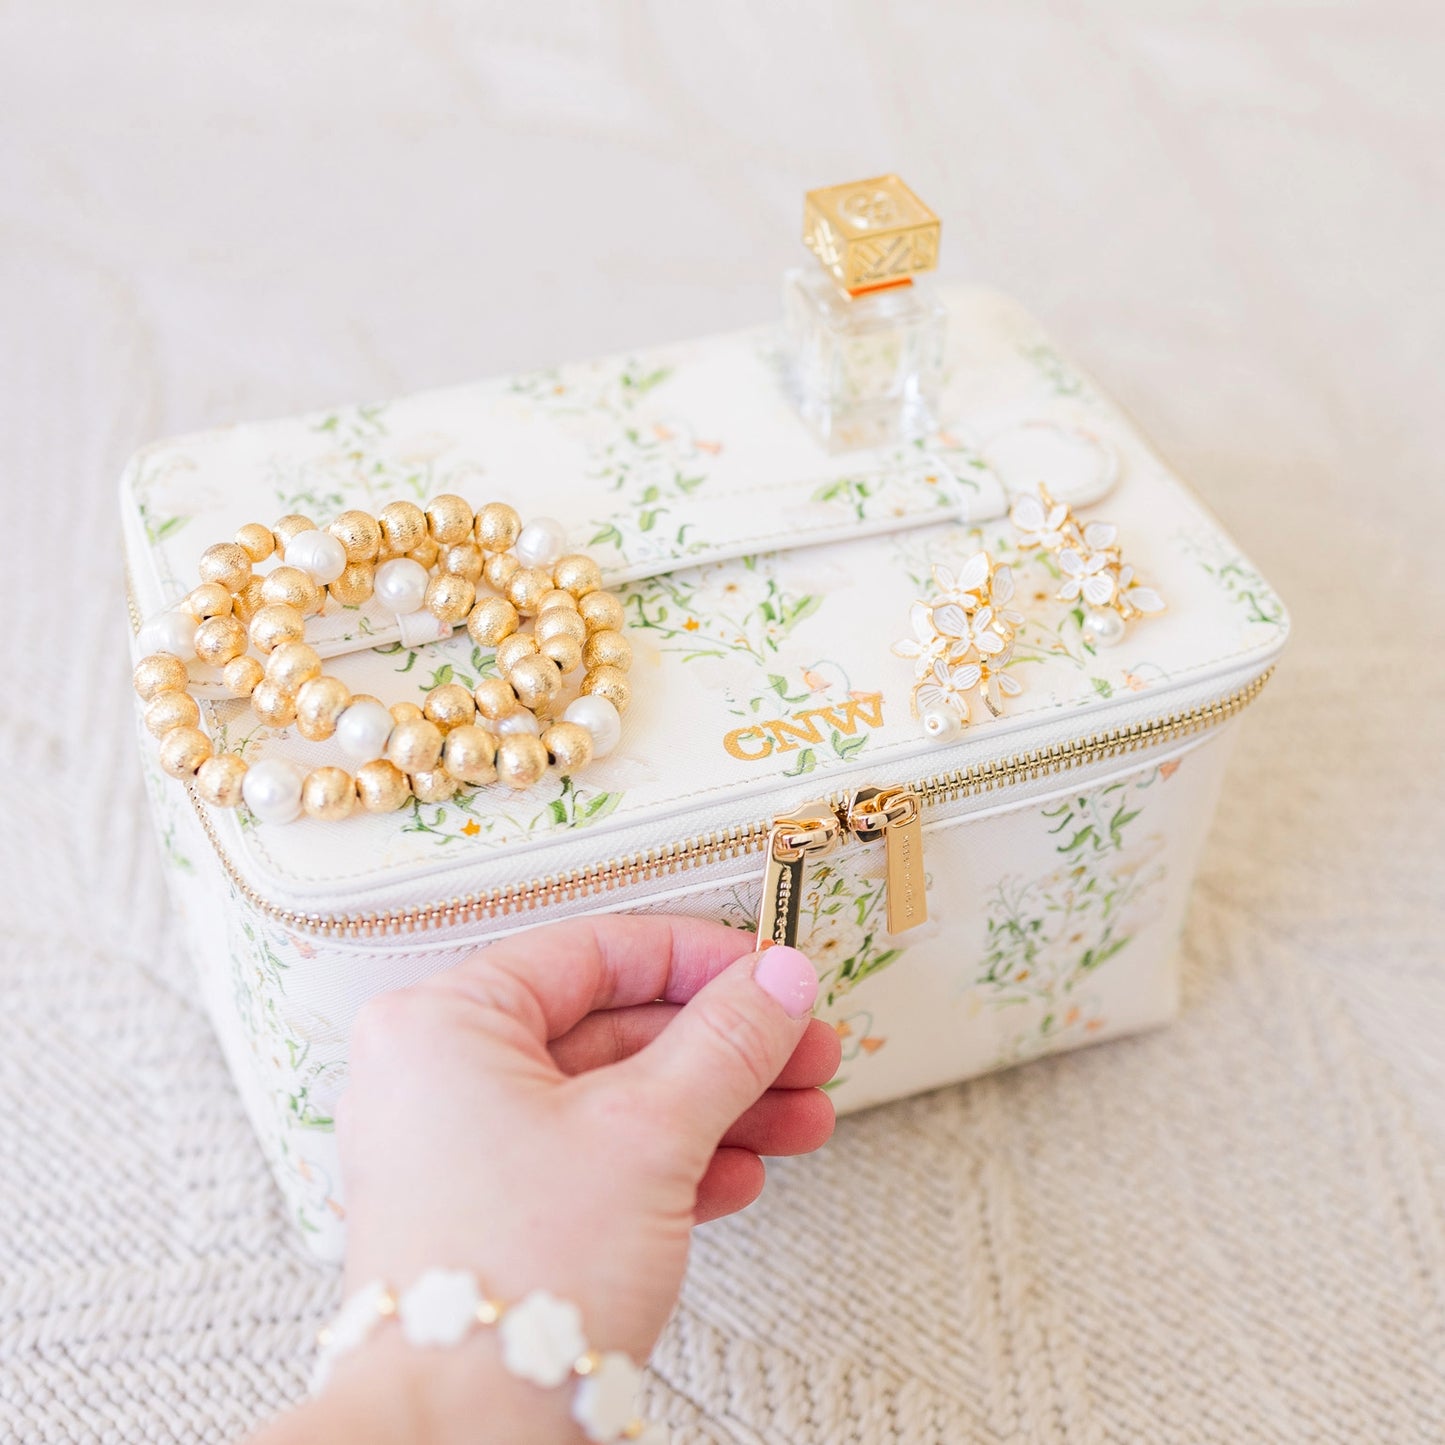 neely and chloe for petite keep large vanity case in garden gala print styled image